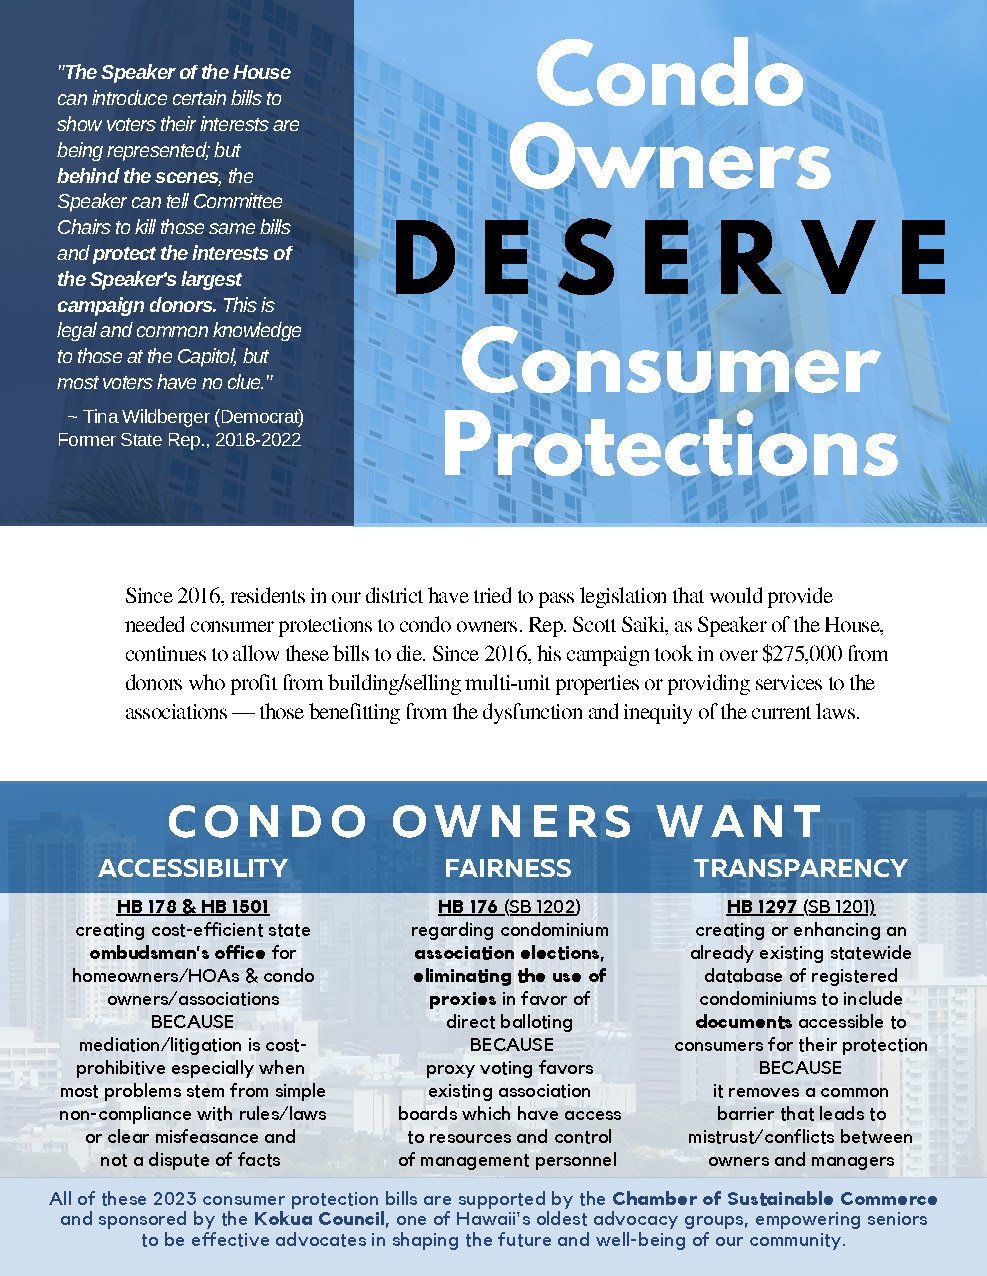 Condo Owners DESERVE Consumer Protections_Page_1.jpg